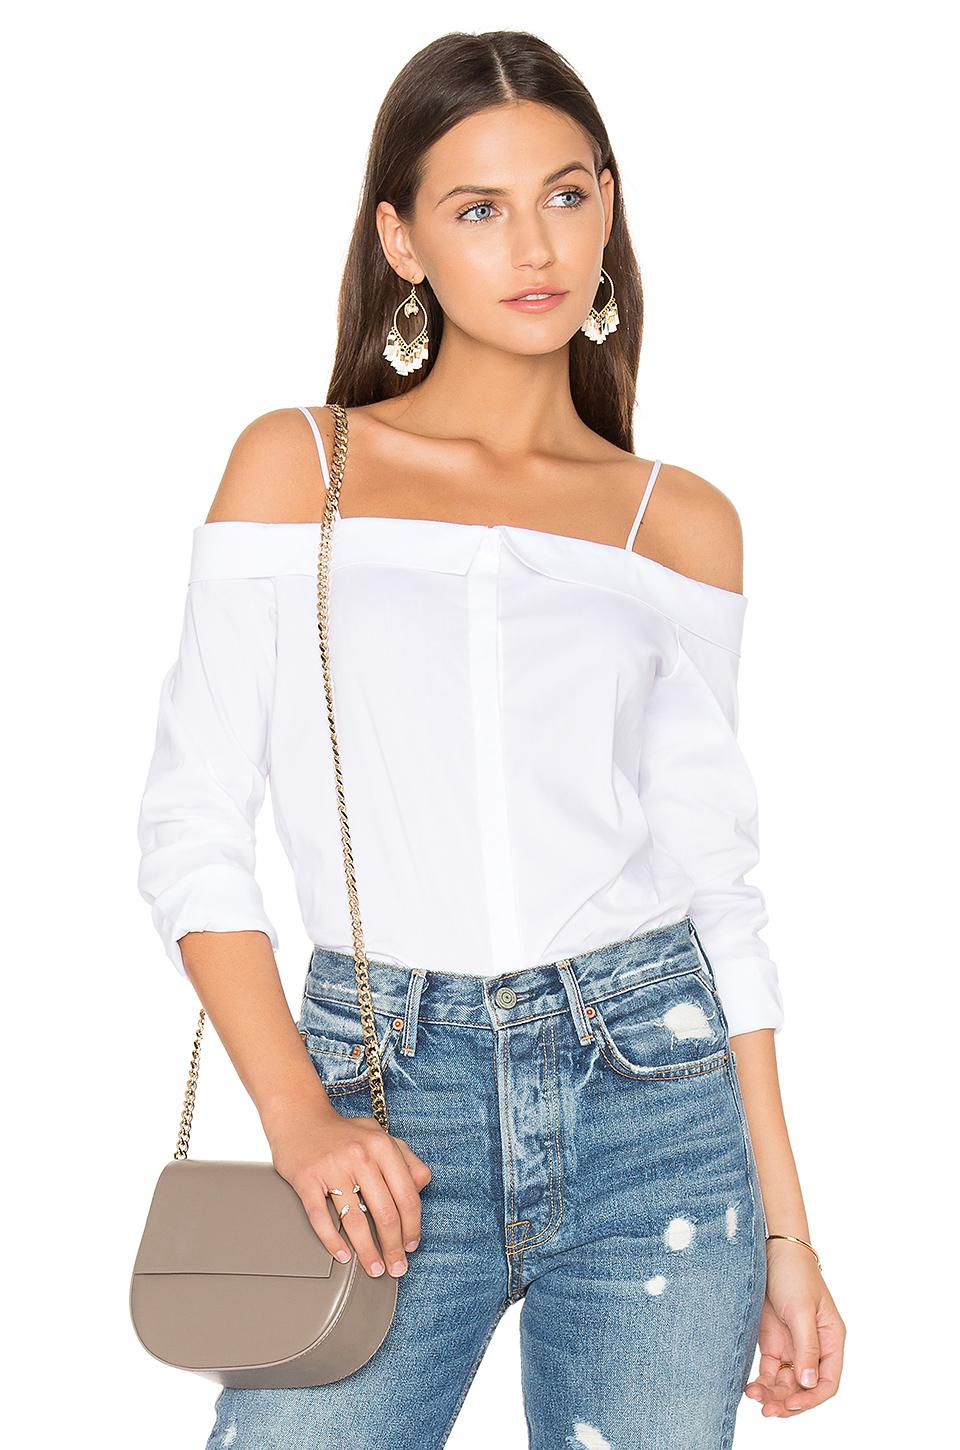 Lyst - Bailey 44 Had My Love Top in White